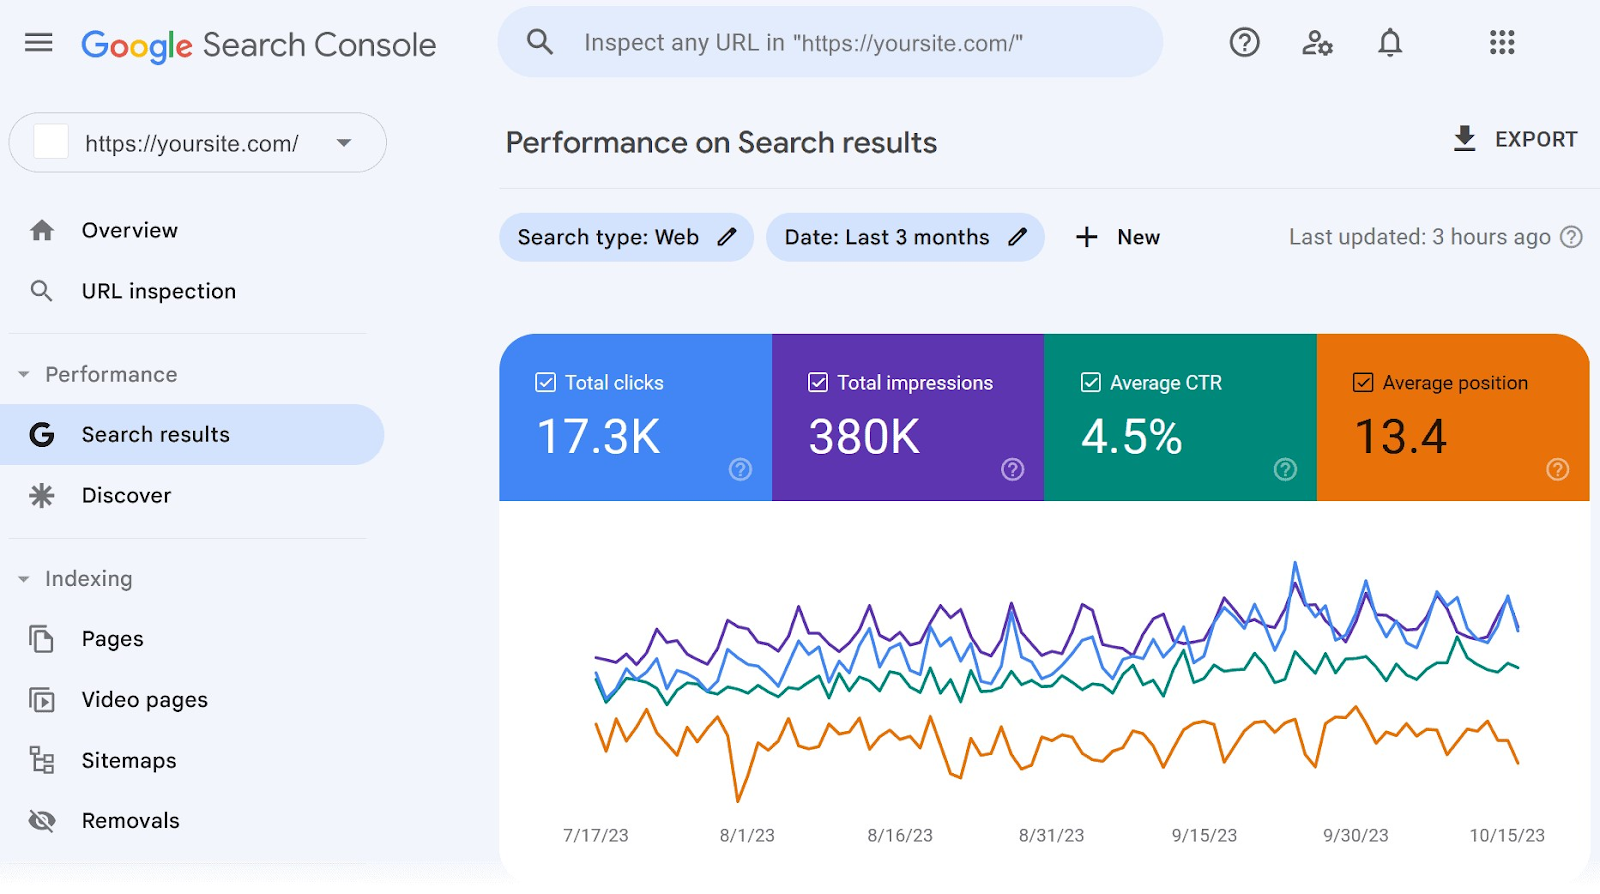 "Performance on Search results" report in Google Search Console